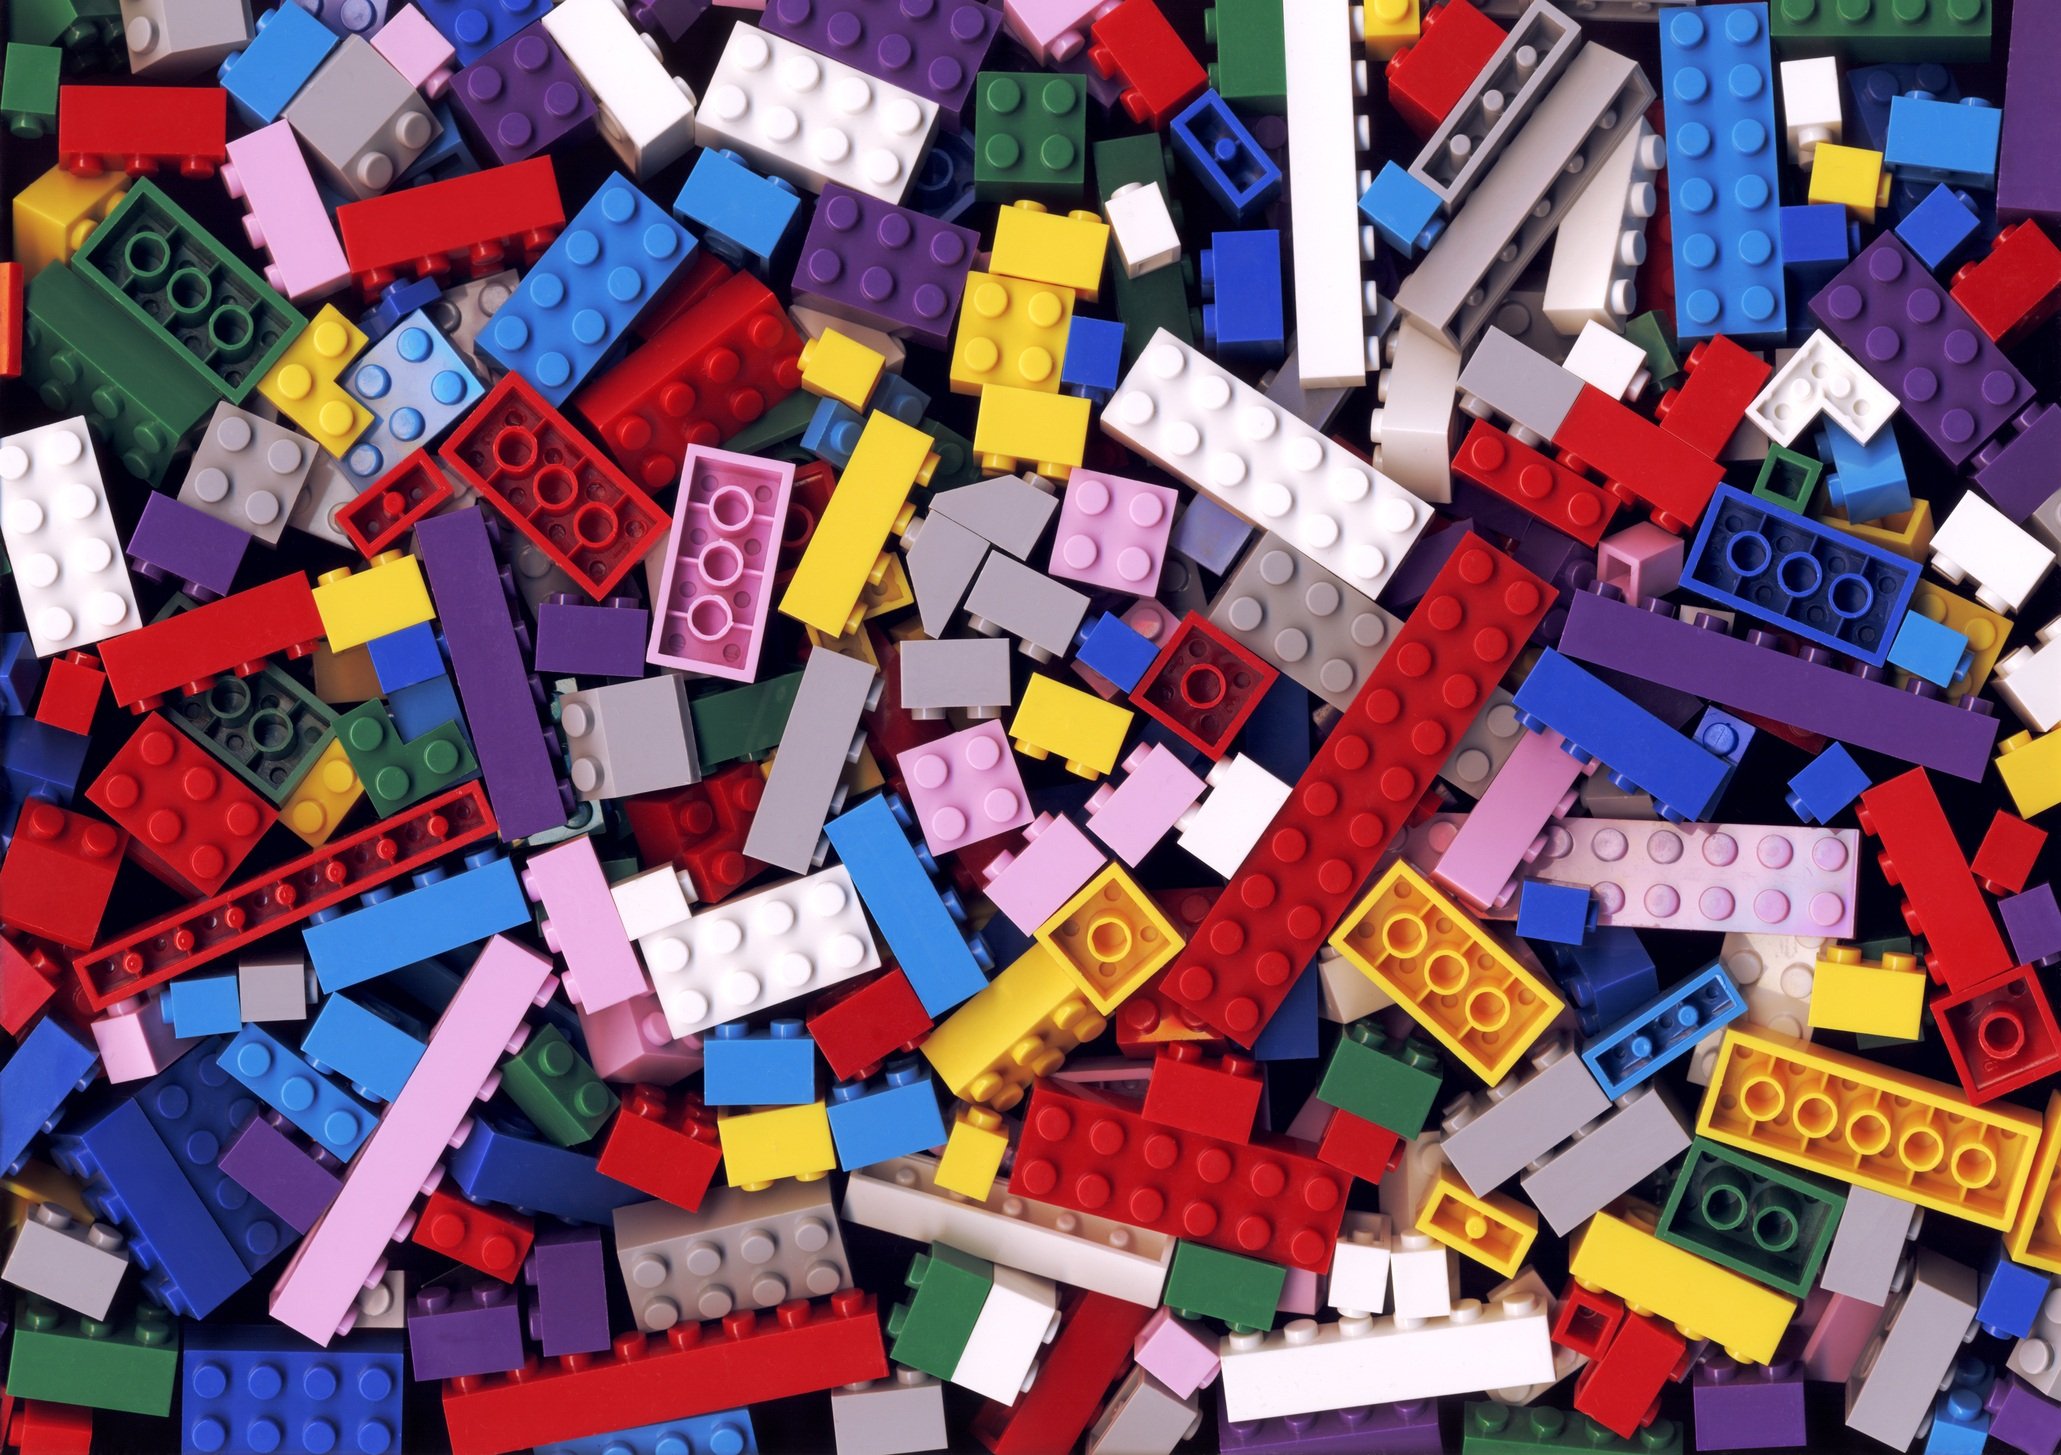 Lot of various colorful Lego blocks background